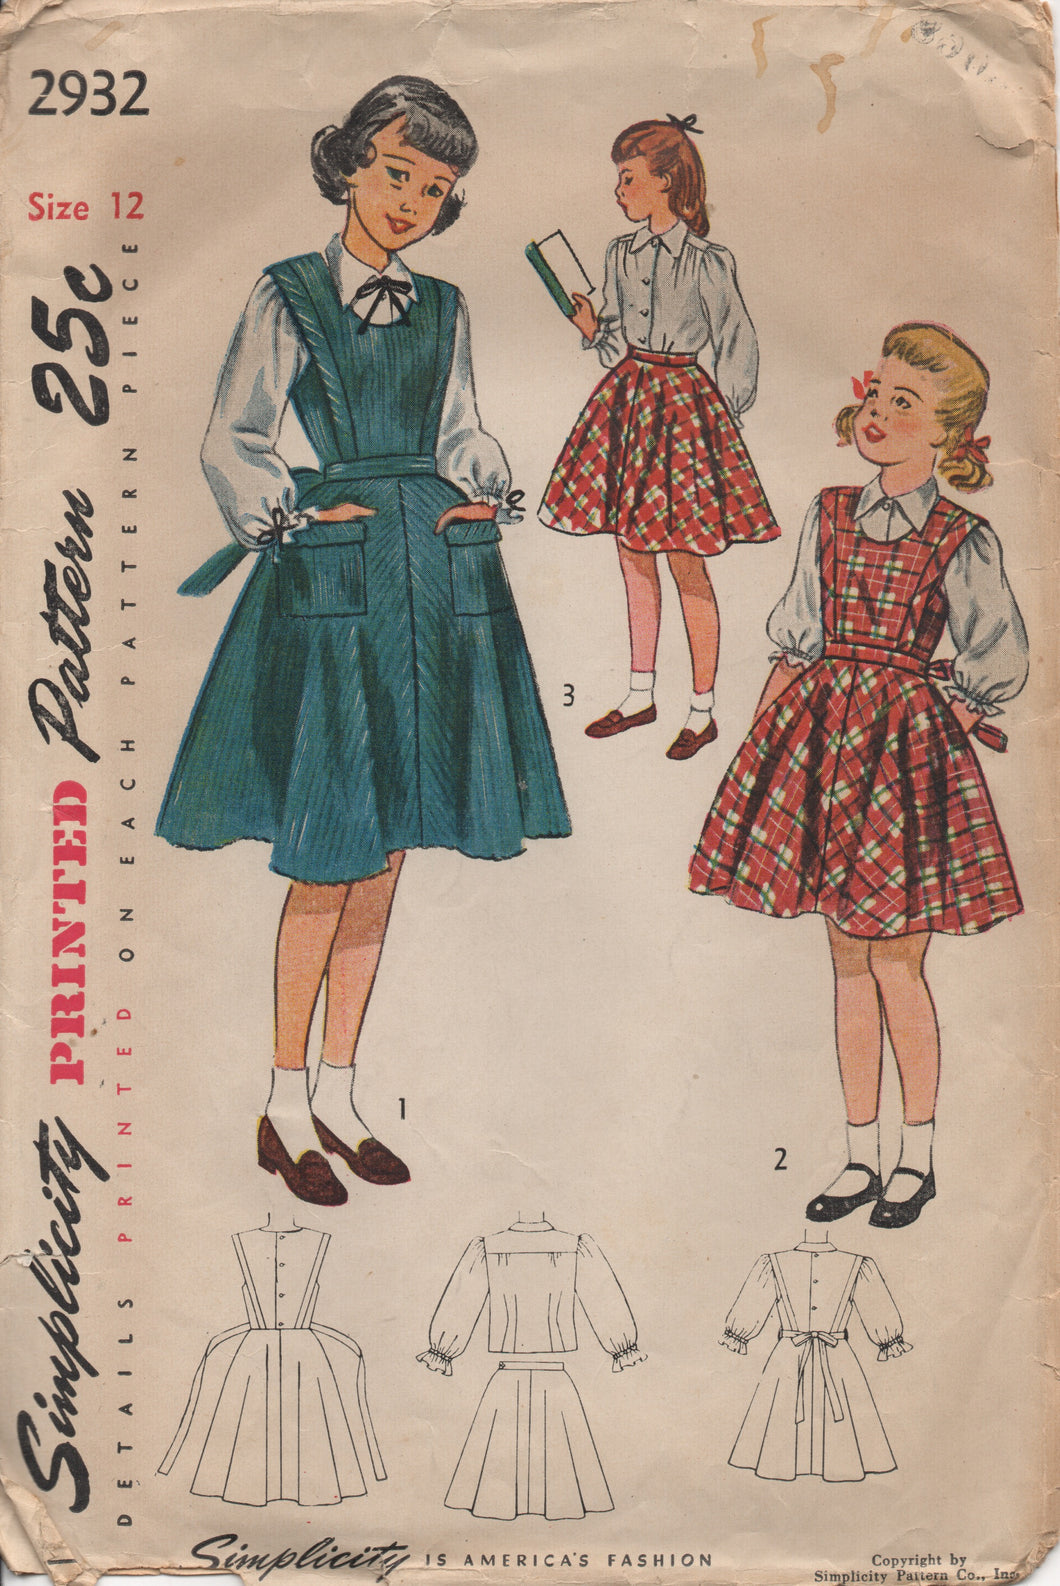 1940's Simplicity Girl's One Piece Dress with Tie Back, Skirt and Blouse Pattern - Bust 30